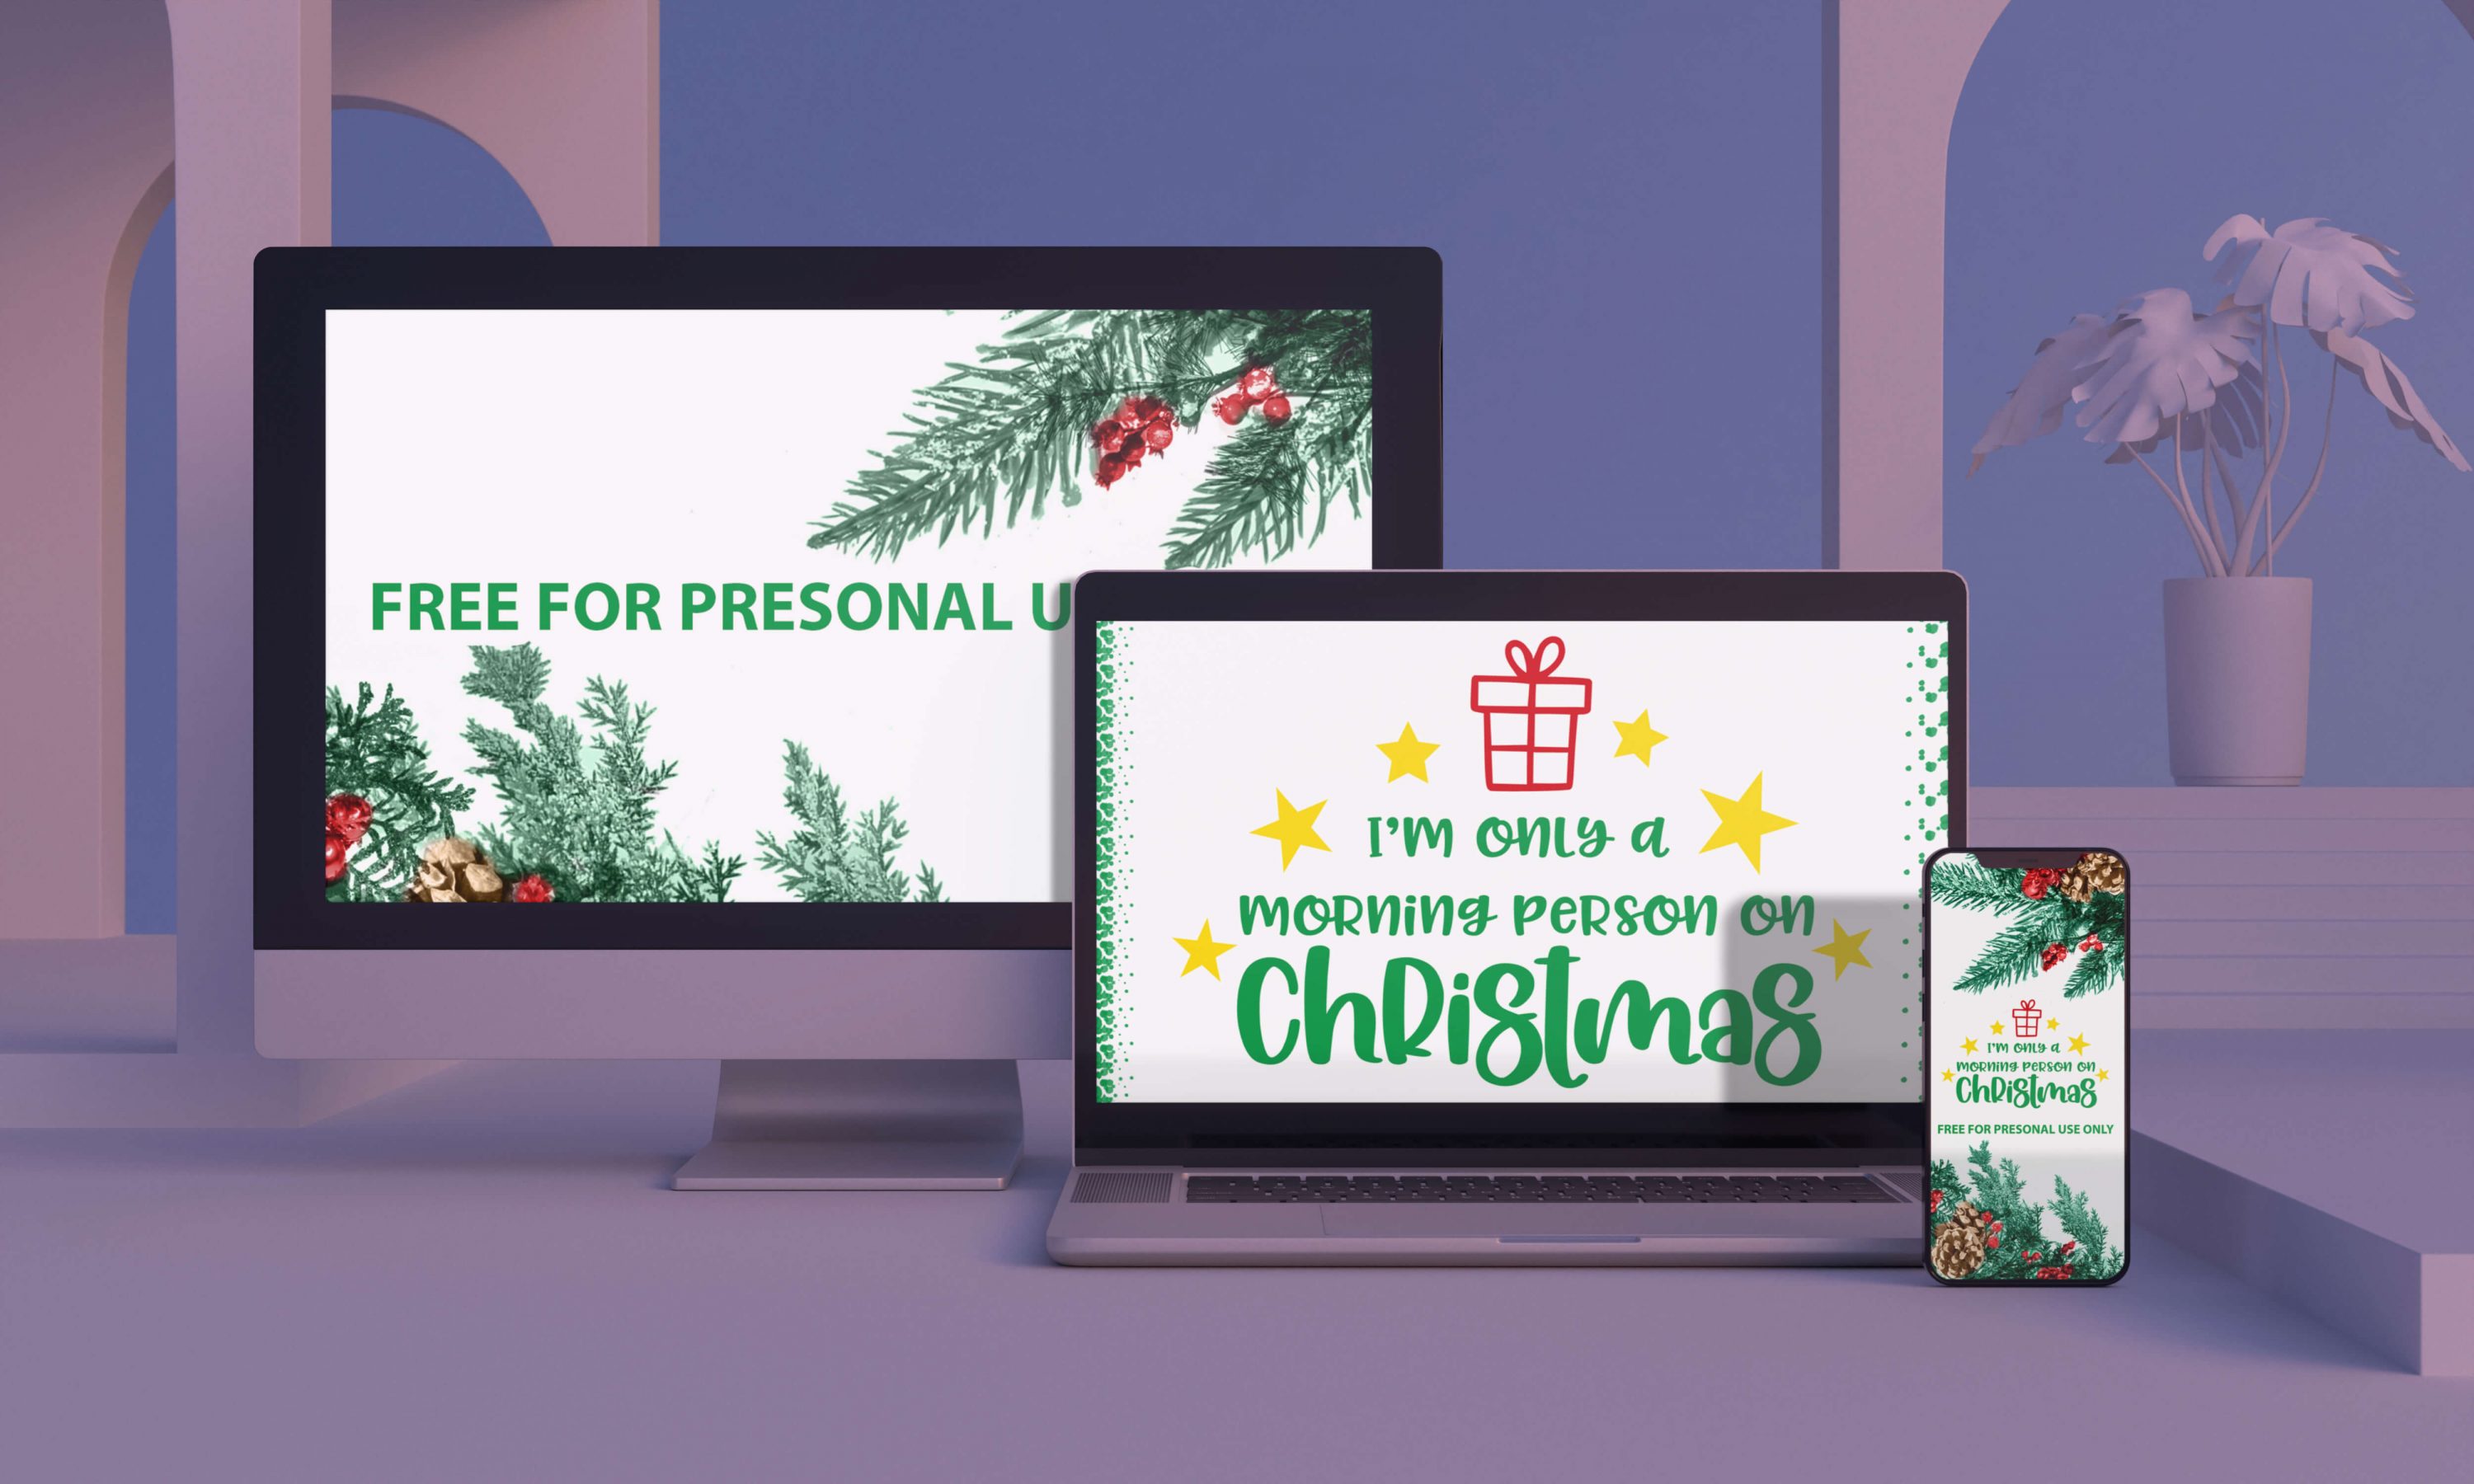 Im only a morning person on Christmas free SVG files facebook image.